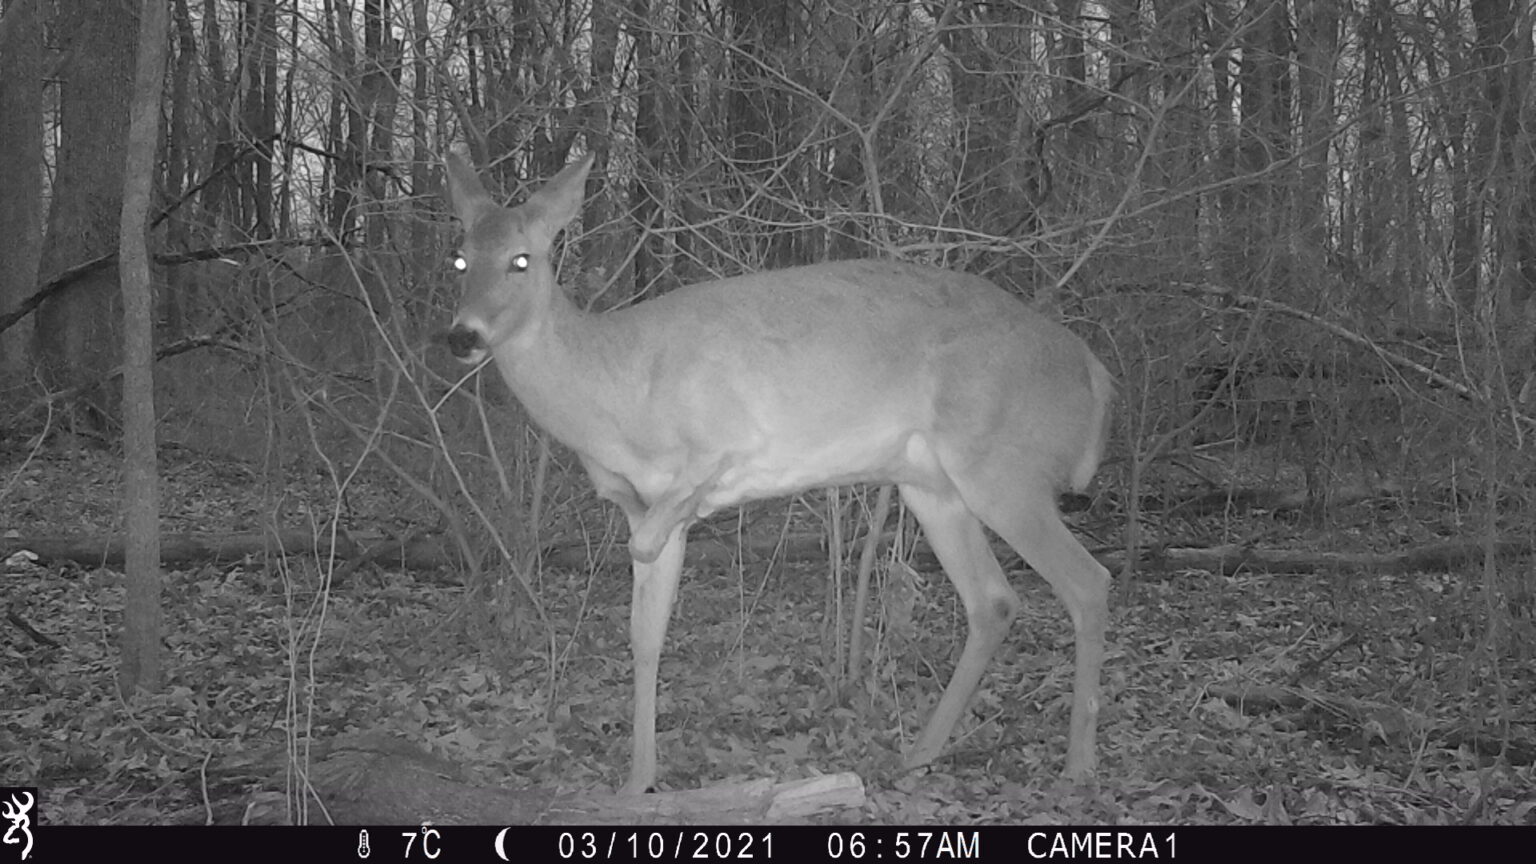 A three legged deer in the woods at night